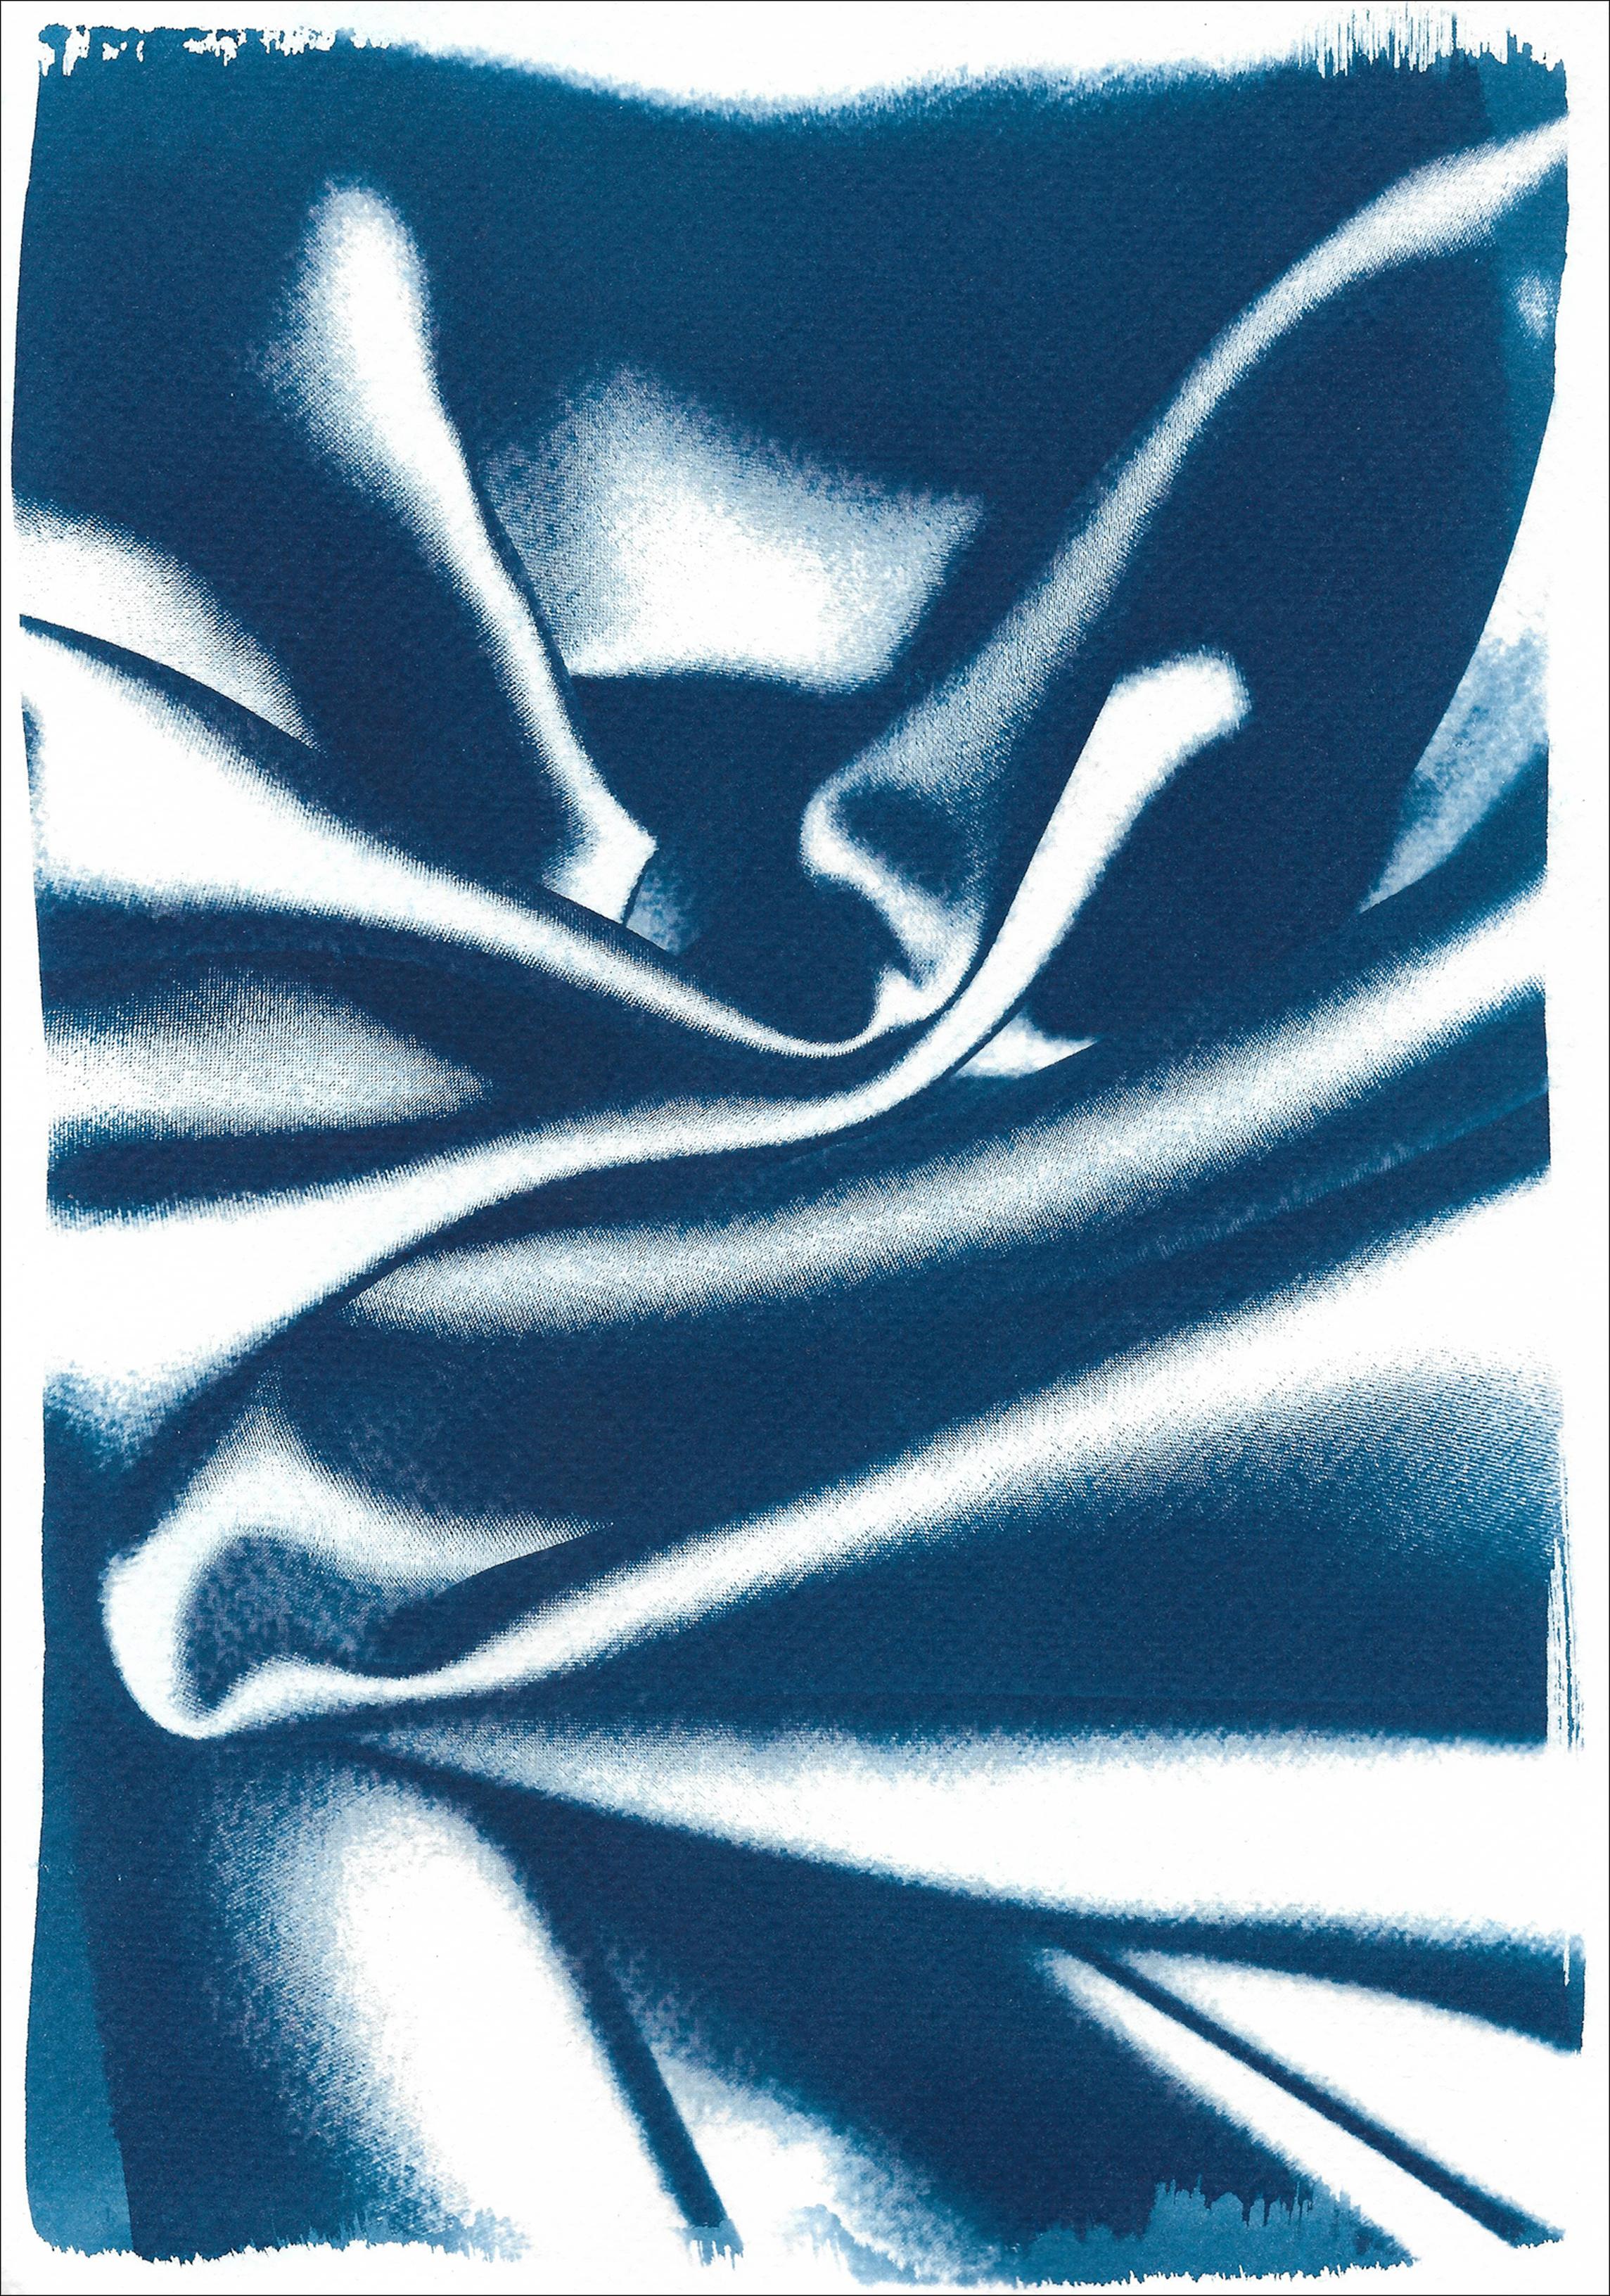 Kind of Cyan Interior Print - Abstract Wavy Silk Pattern in Classic Blue, Cyanotype Print, Subtle Gesture 